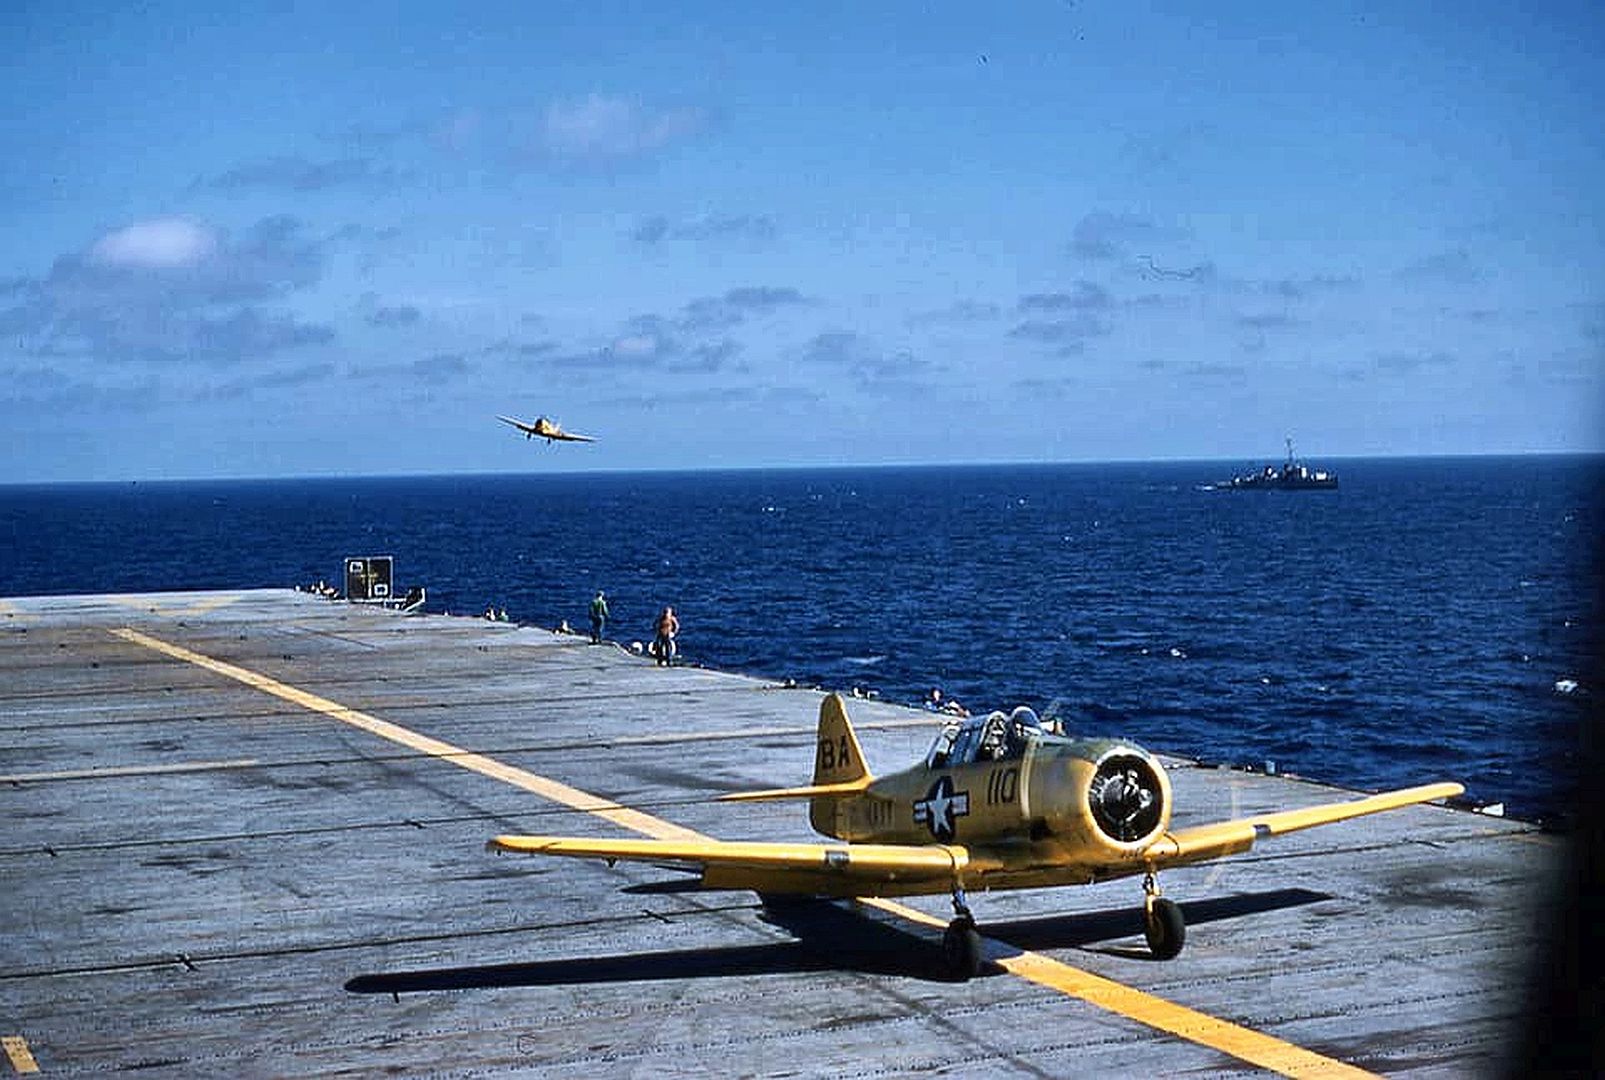 USS Saipan Carrier Qualifications With SNJ Texans Circa 1955